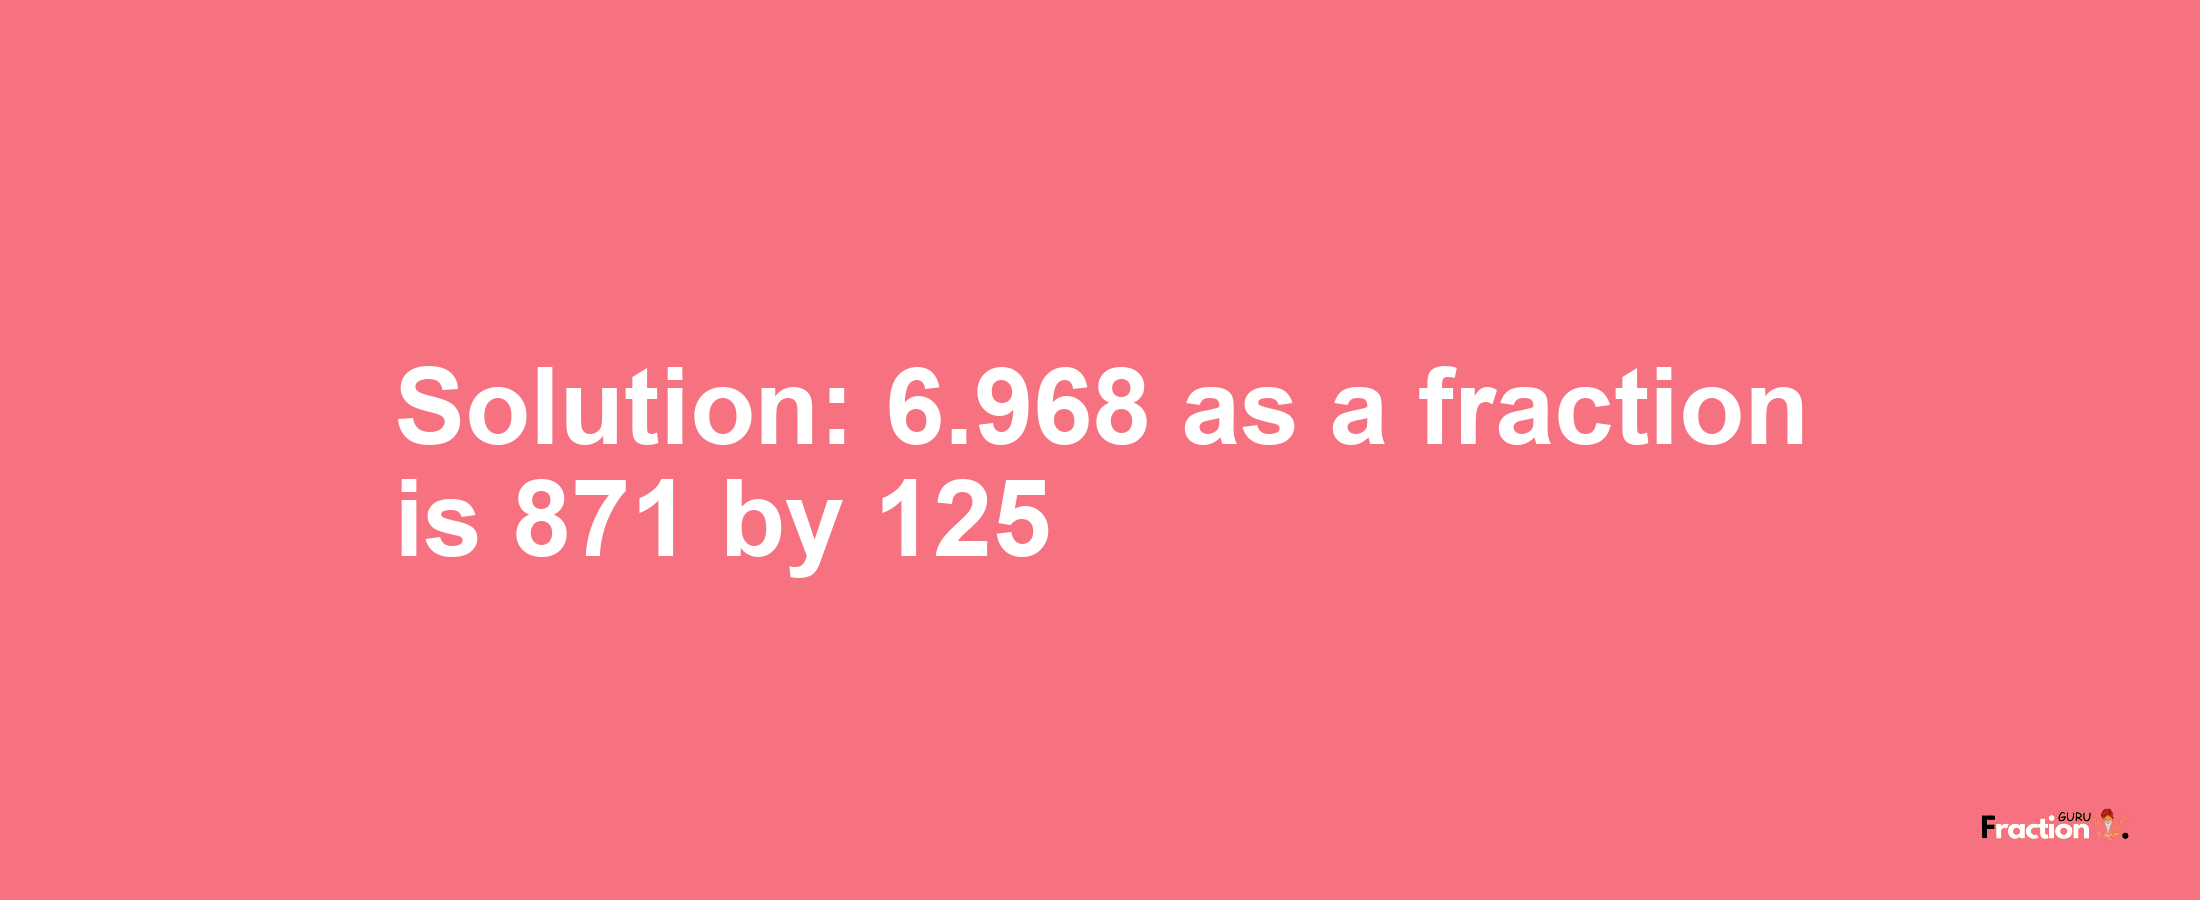 Solution:6.968 as a fraction is 871/125